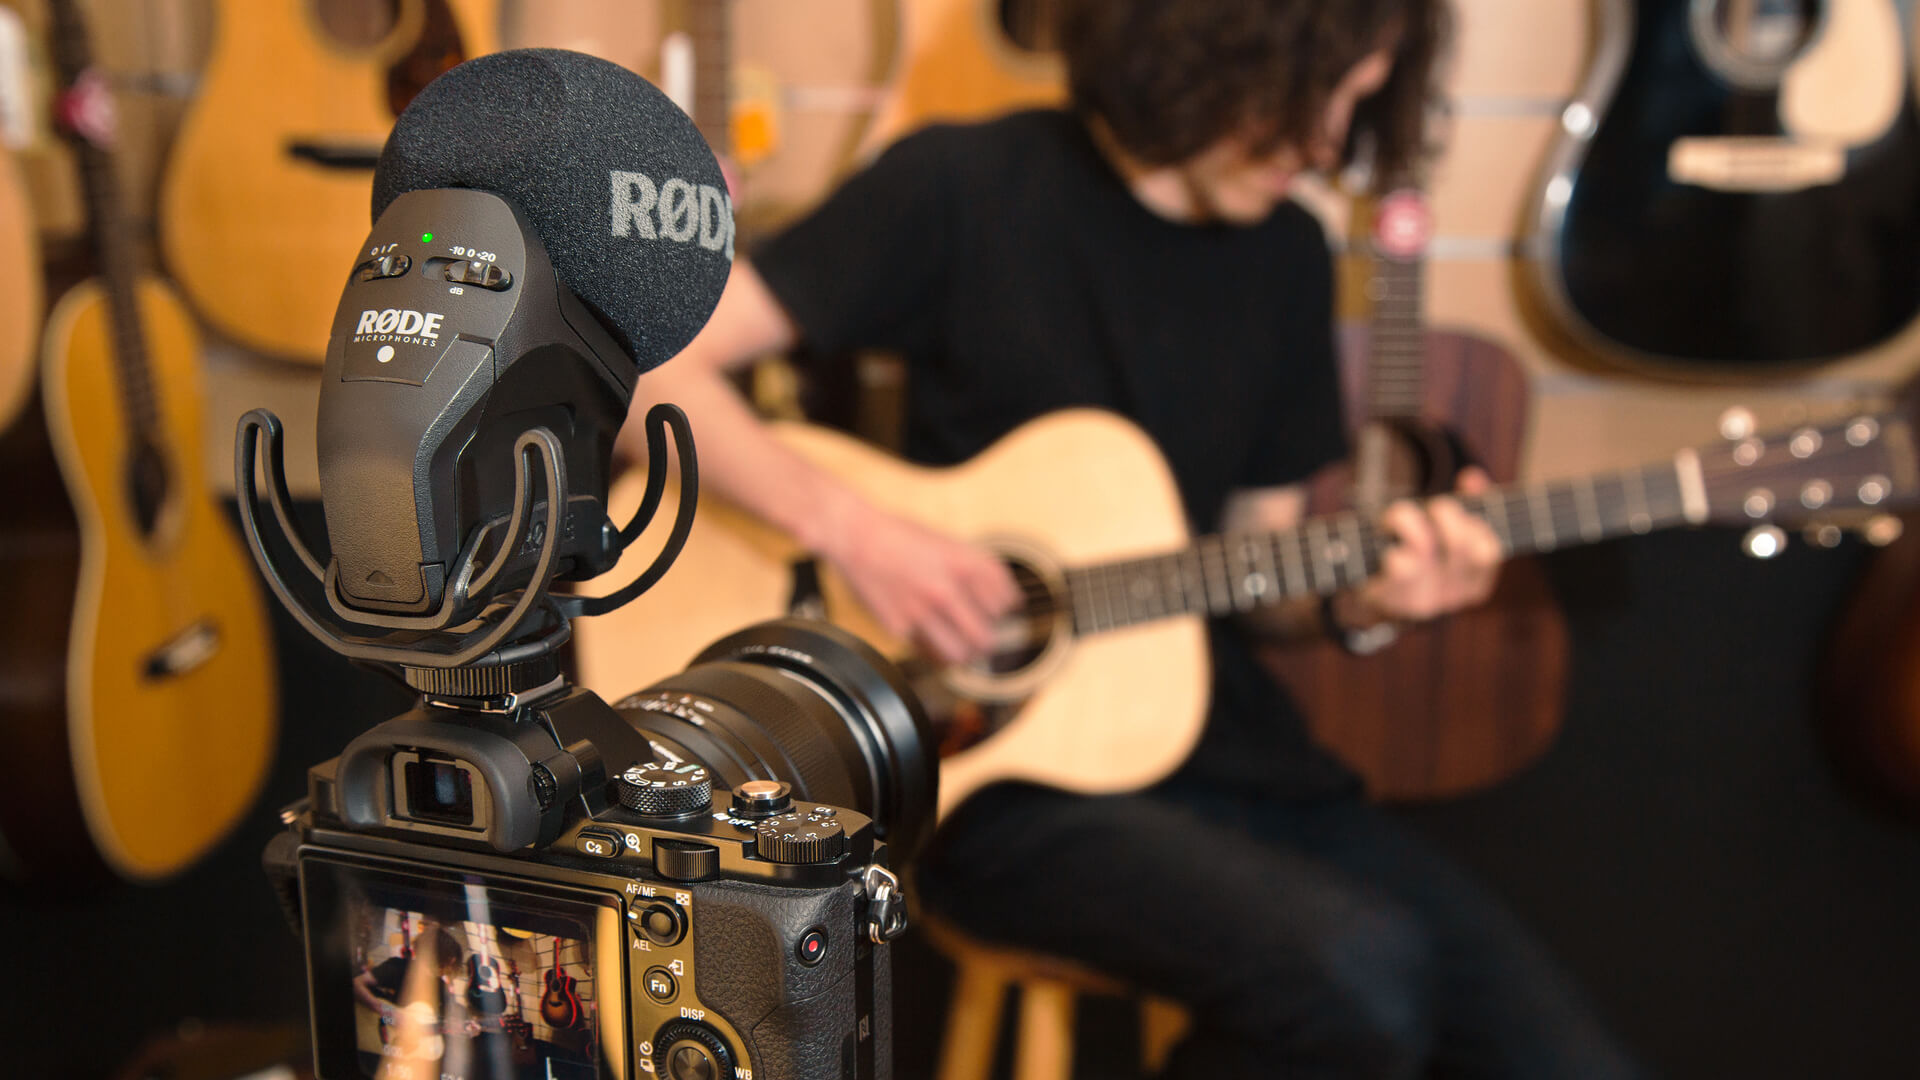 Stereo VideoMic Pro on camera that is filming guitarist